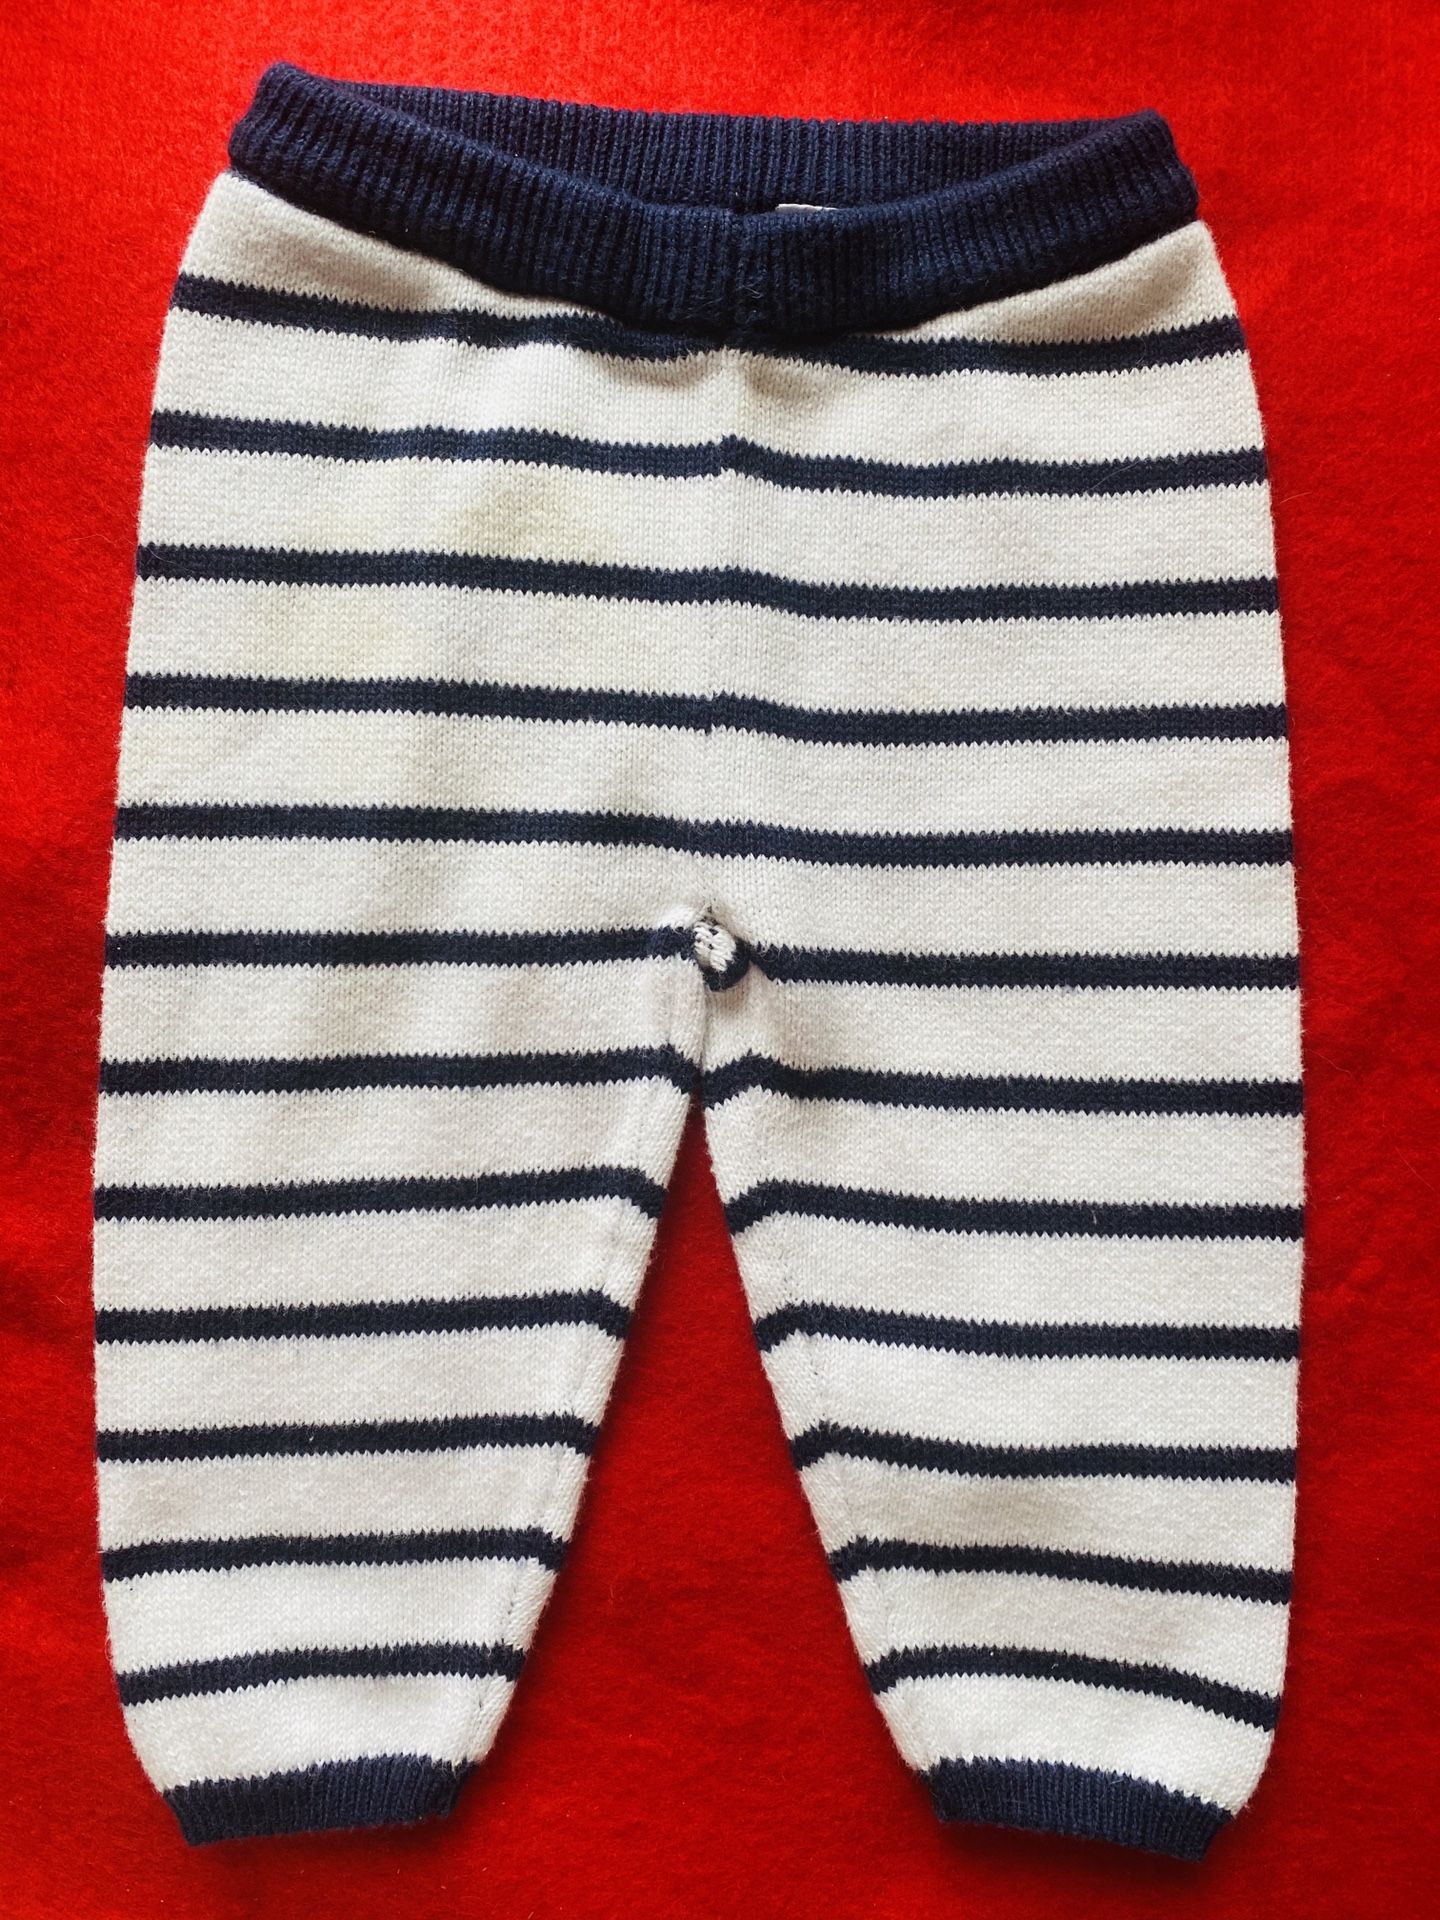 Janie & Jack Knitted Pants Size 3/6